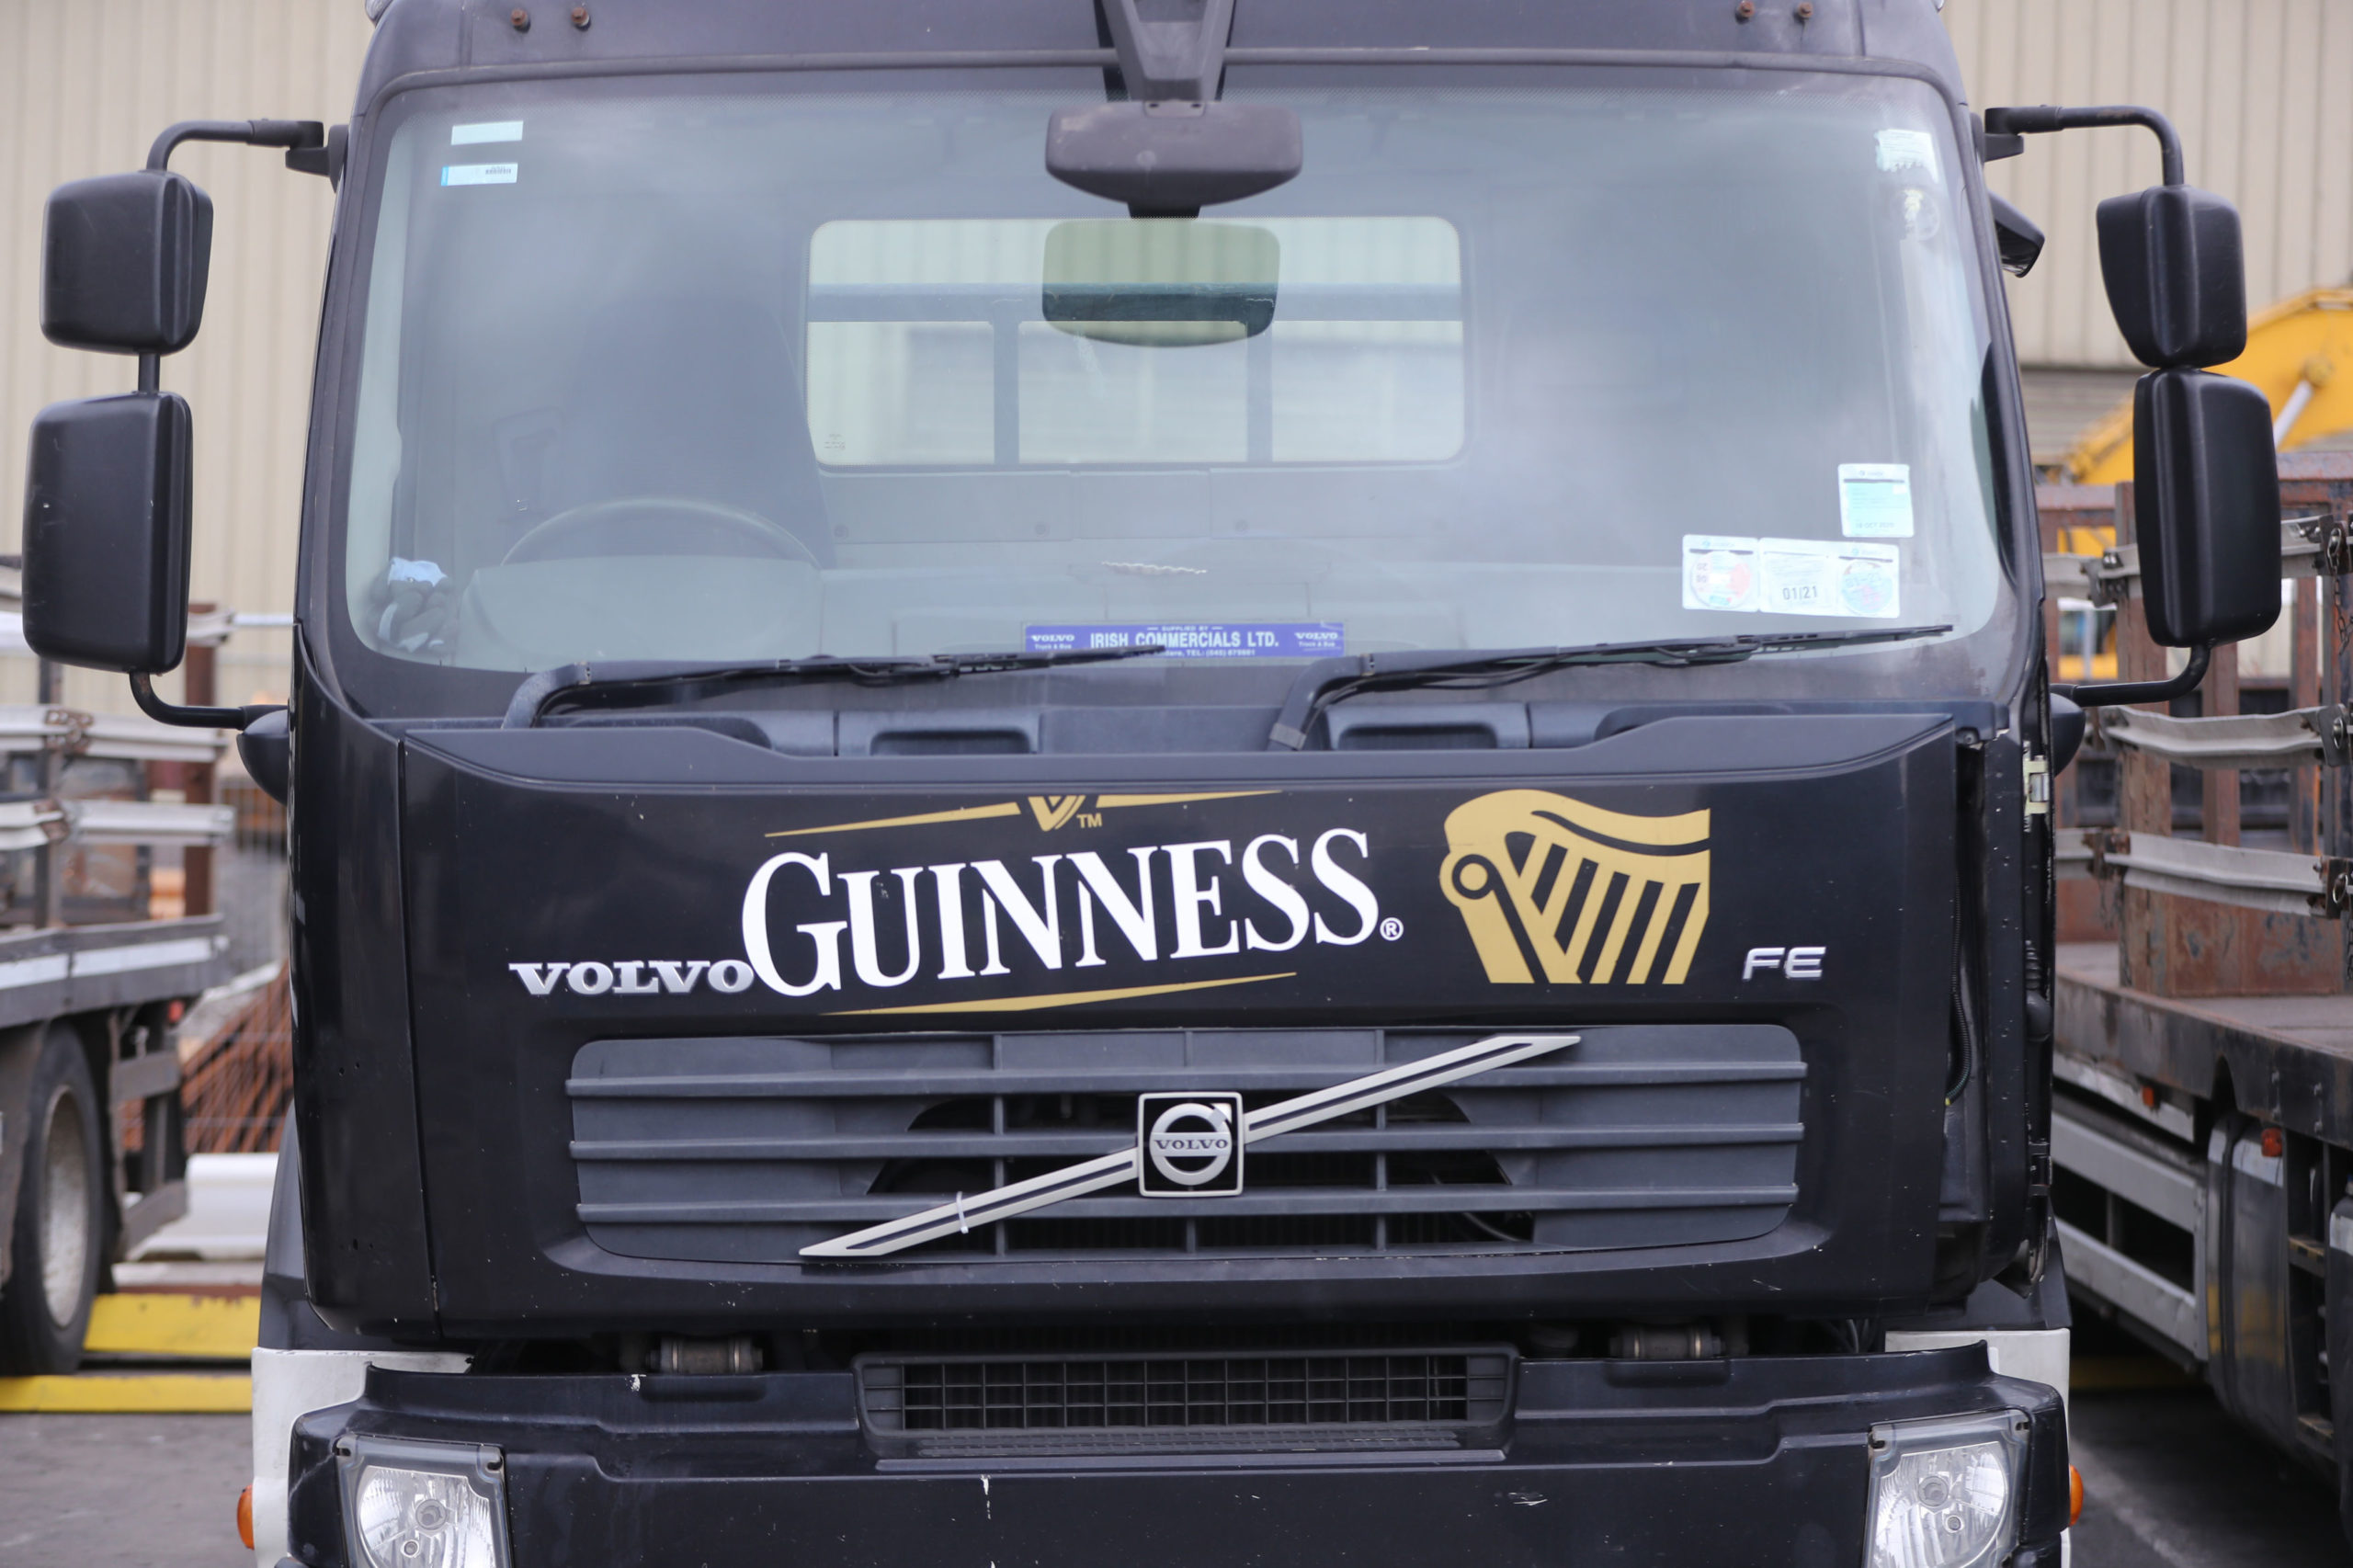 A Guinness delivery truck